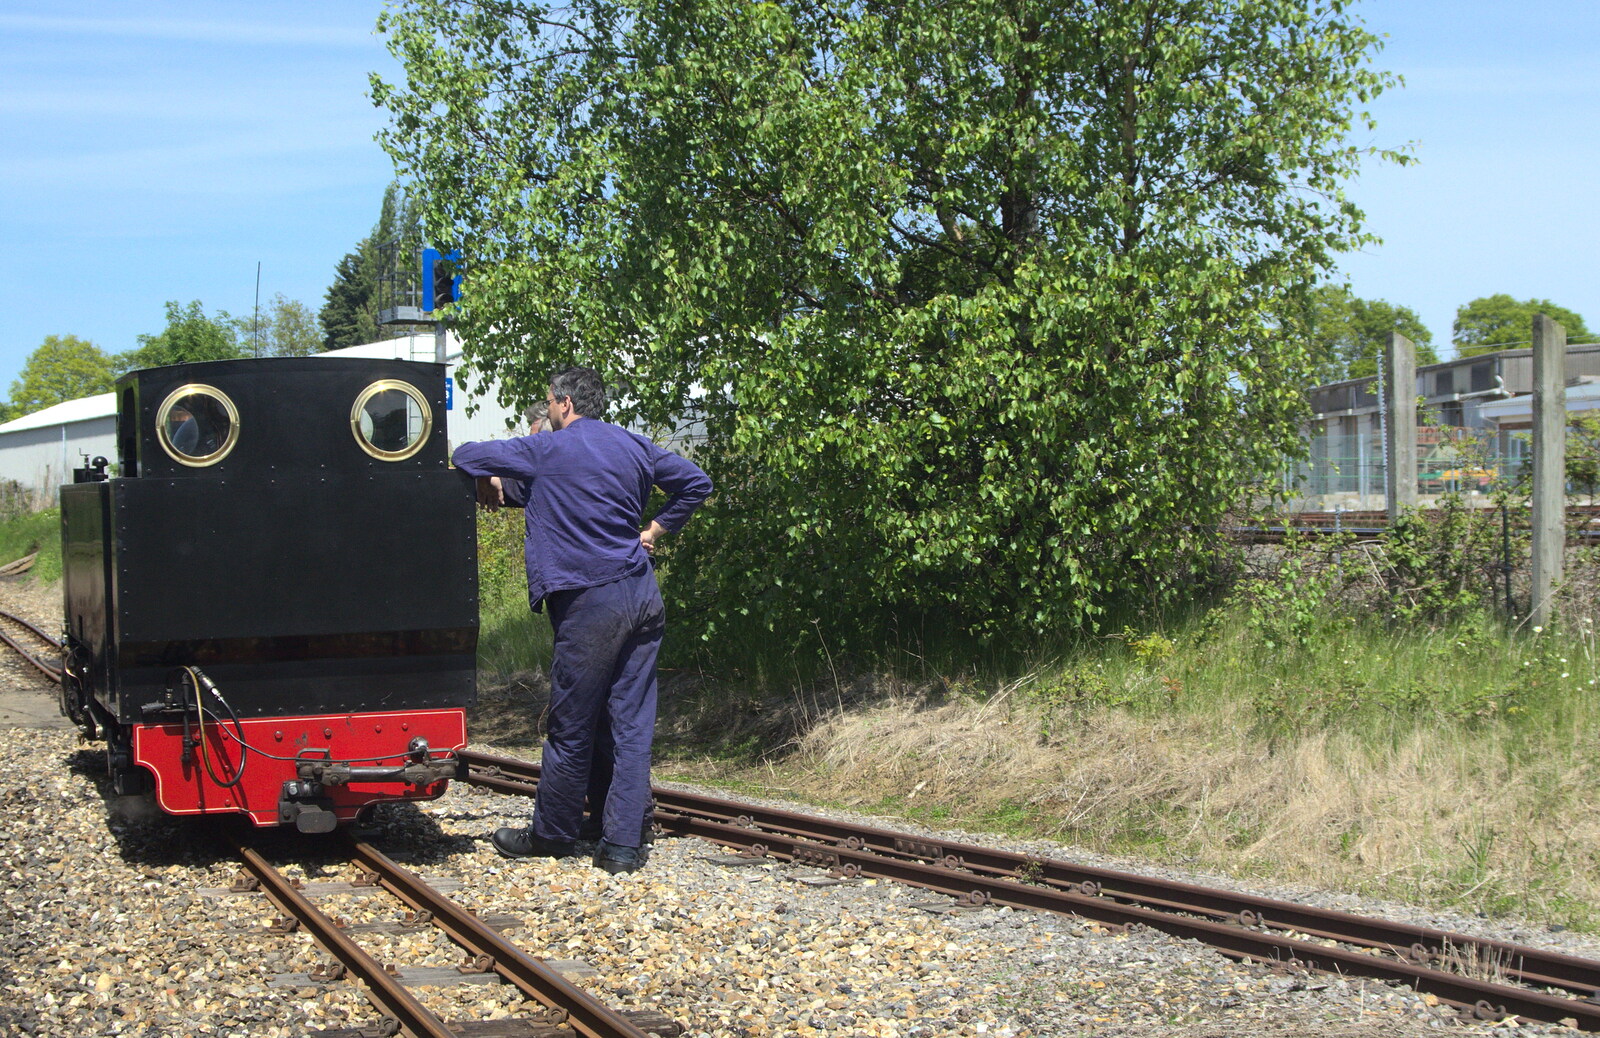 Some dude leans on an engine from The Bure Valley Railway, Aylsham, Norfolk - 26th May 2013